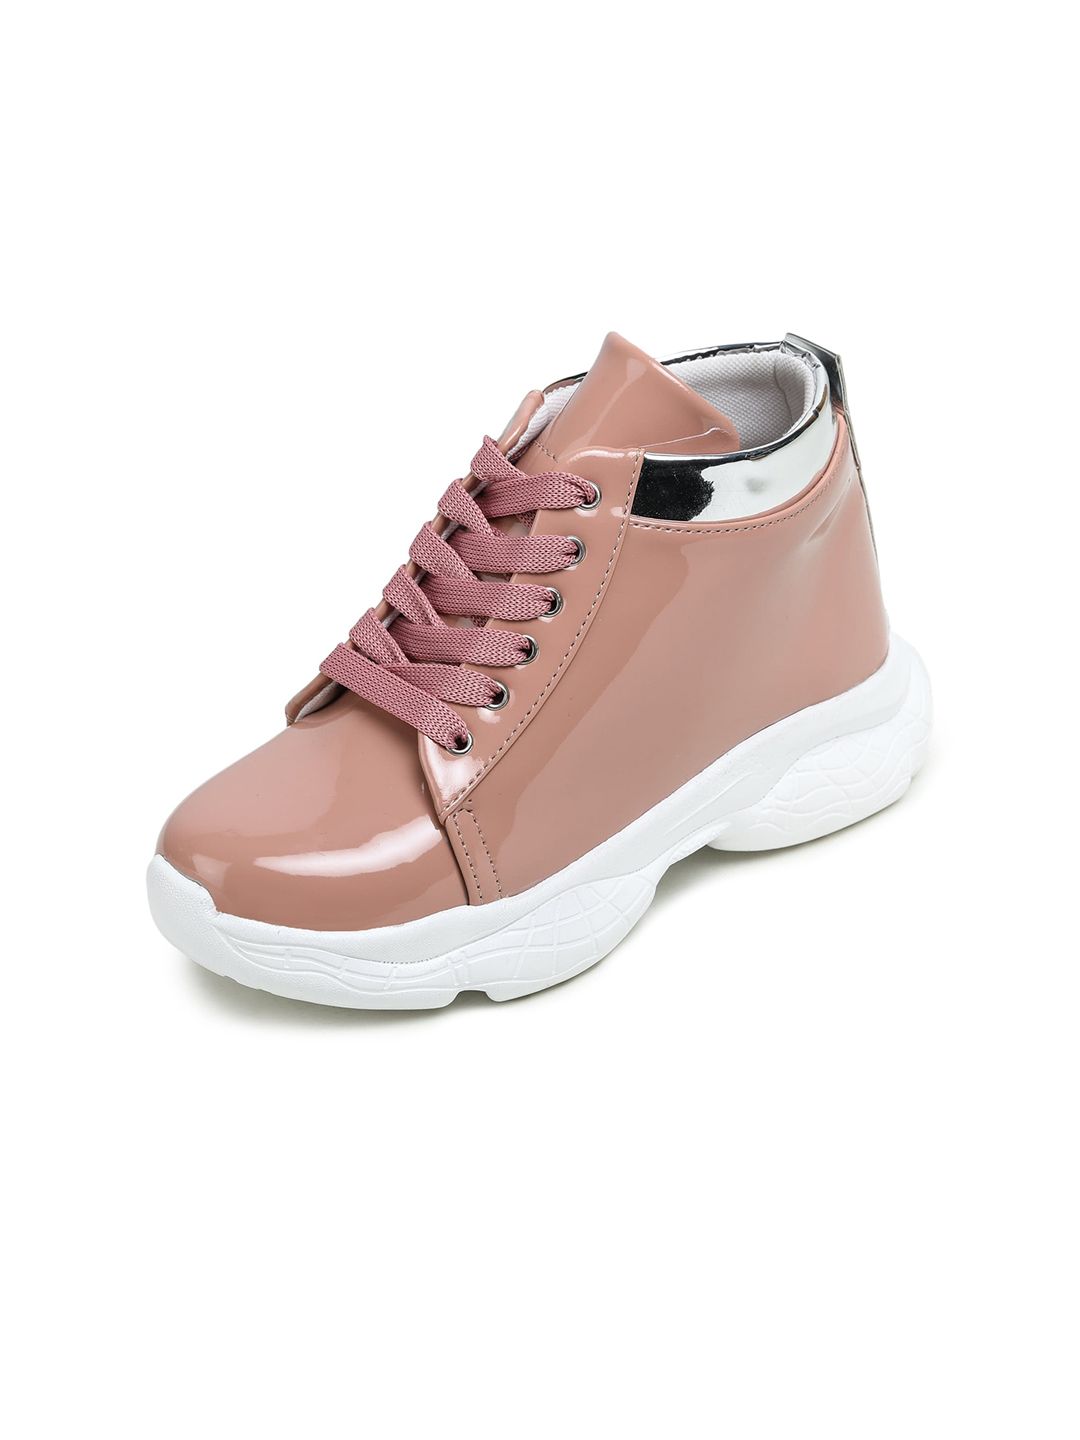 BOOTCO Women Peach-Coloured Light Weight High Ankle Sneakers Price in India